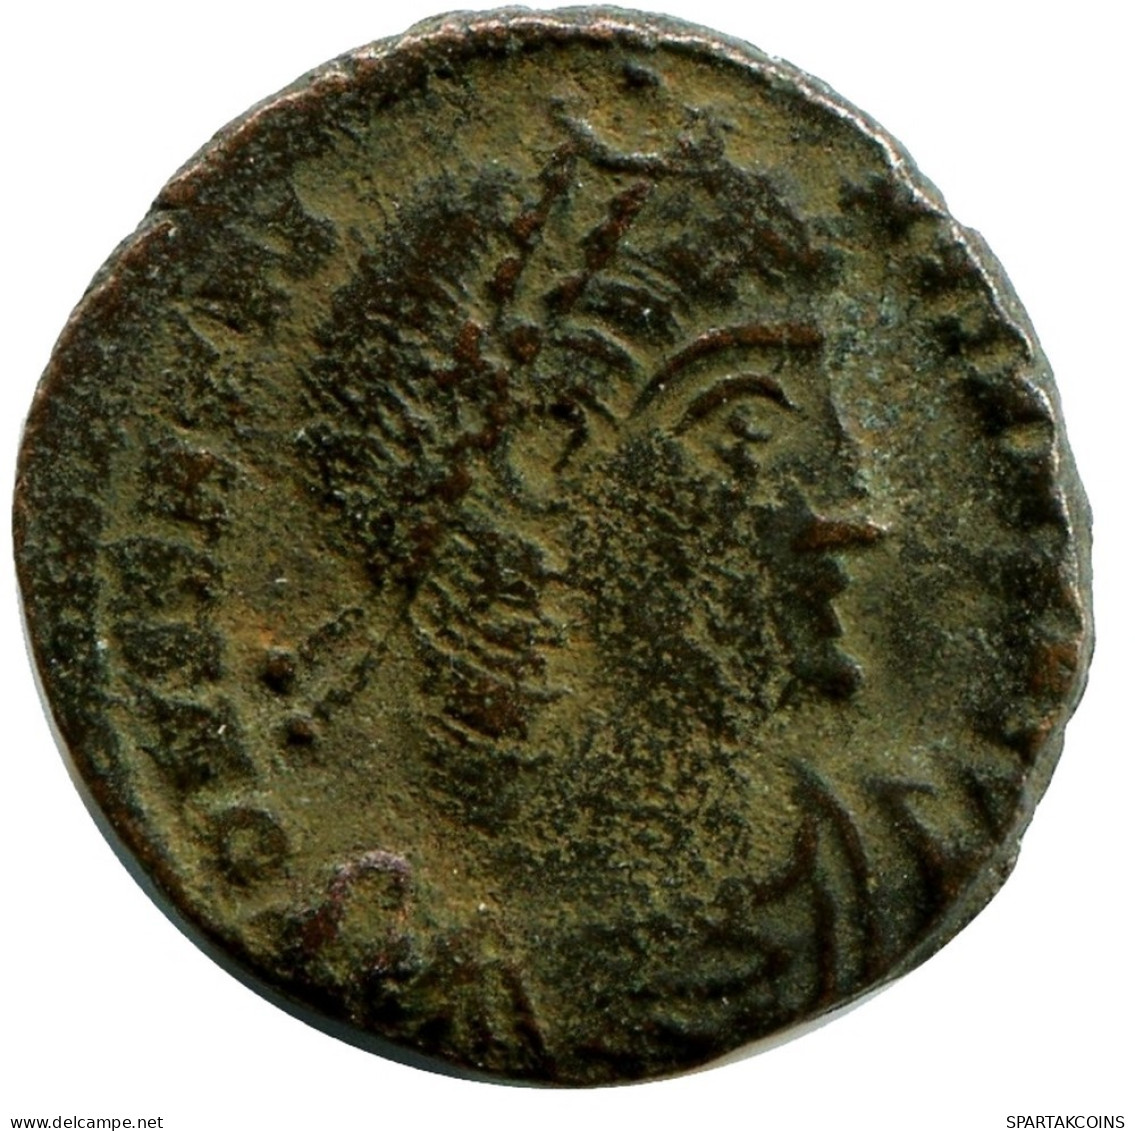 CONSTANTINE I MINTED IN CYZICUS FROM THE ROYAL ONTARIO MUSEUM #ANC11030.14.E.A - The Christian Empire (307 AD Tot 363 AD)